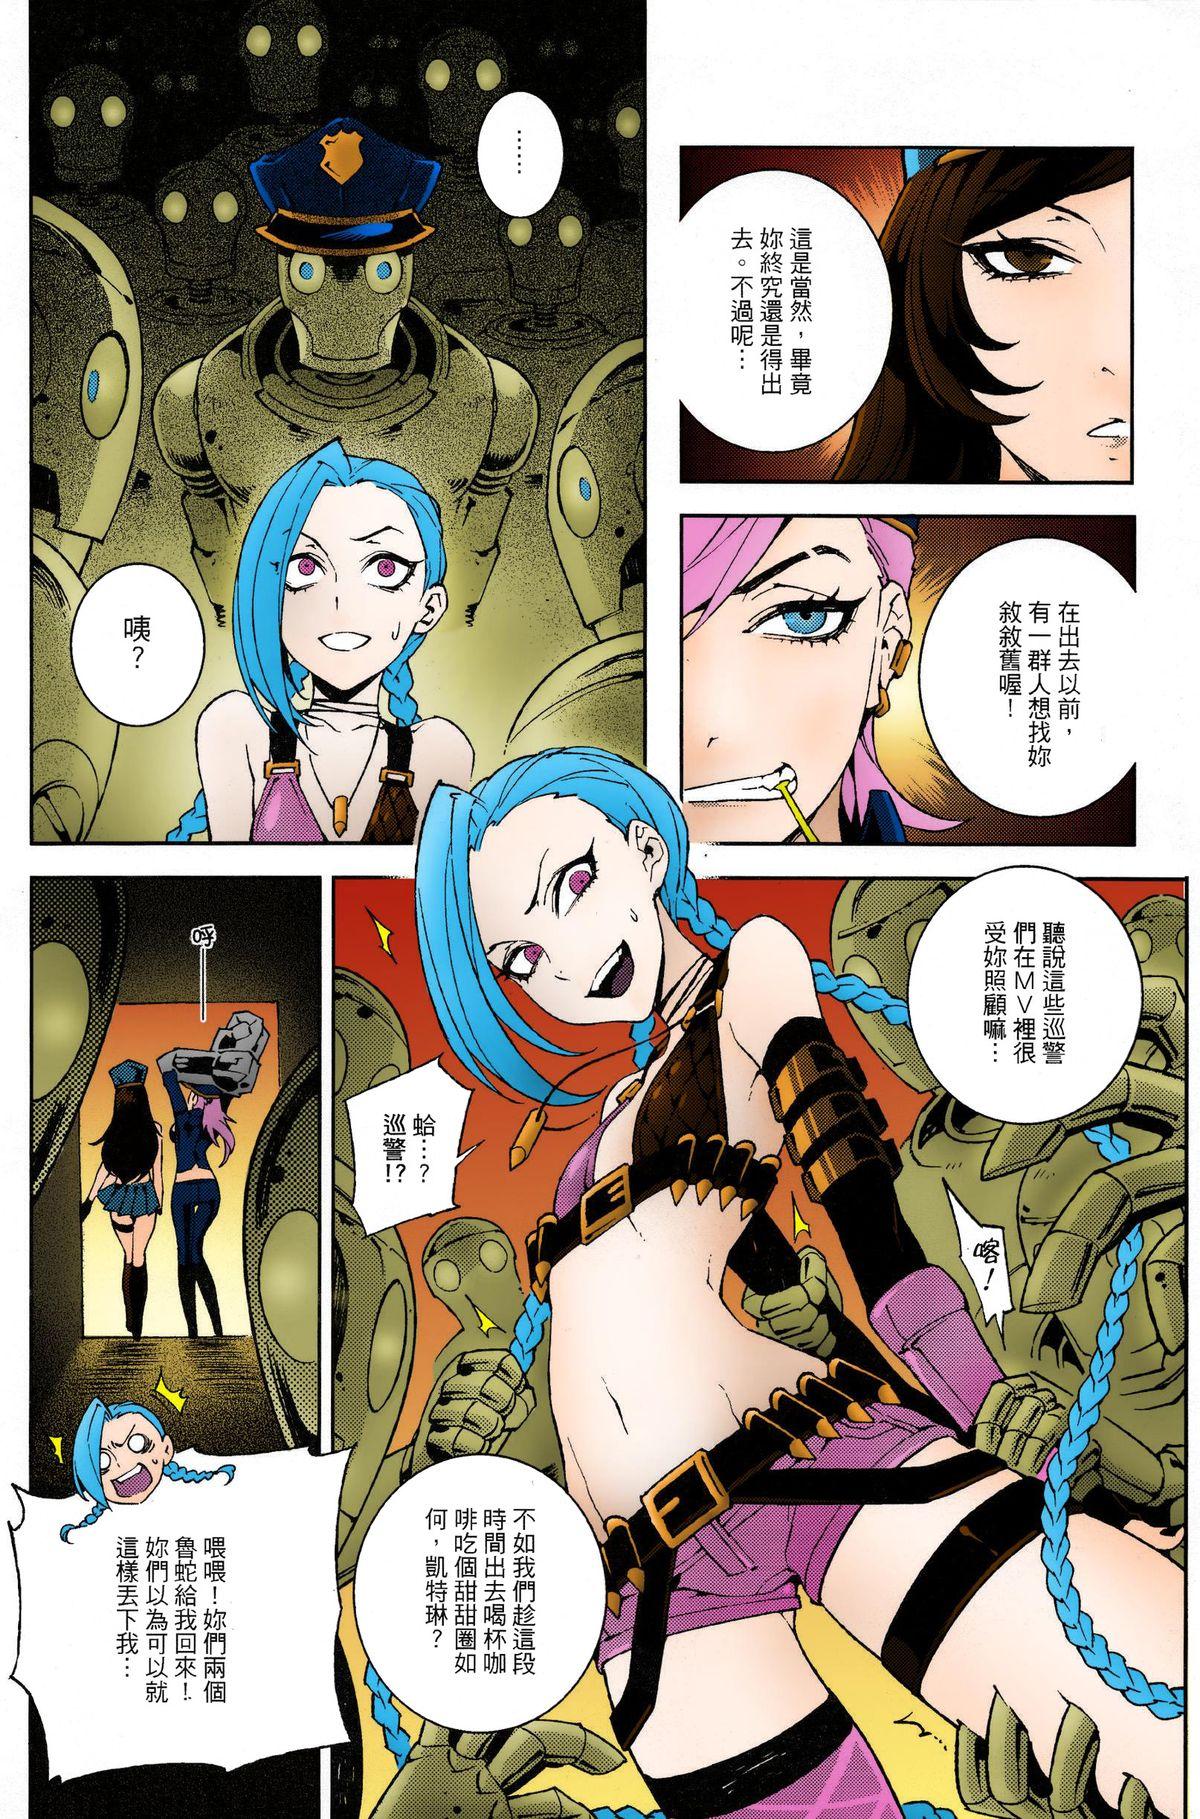 Sloppy Blow Job JINX Come On! Shoot Faster - League of legends Sucking - Page 5